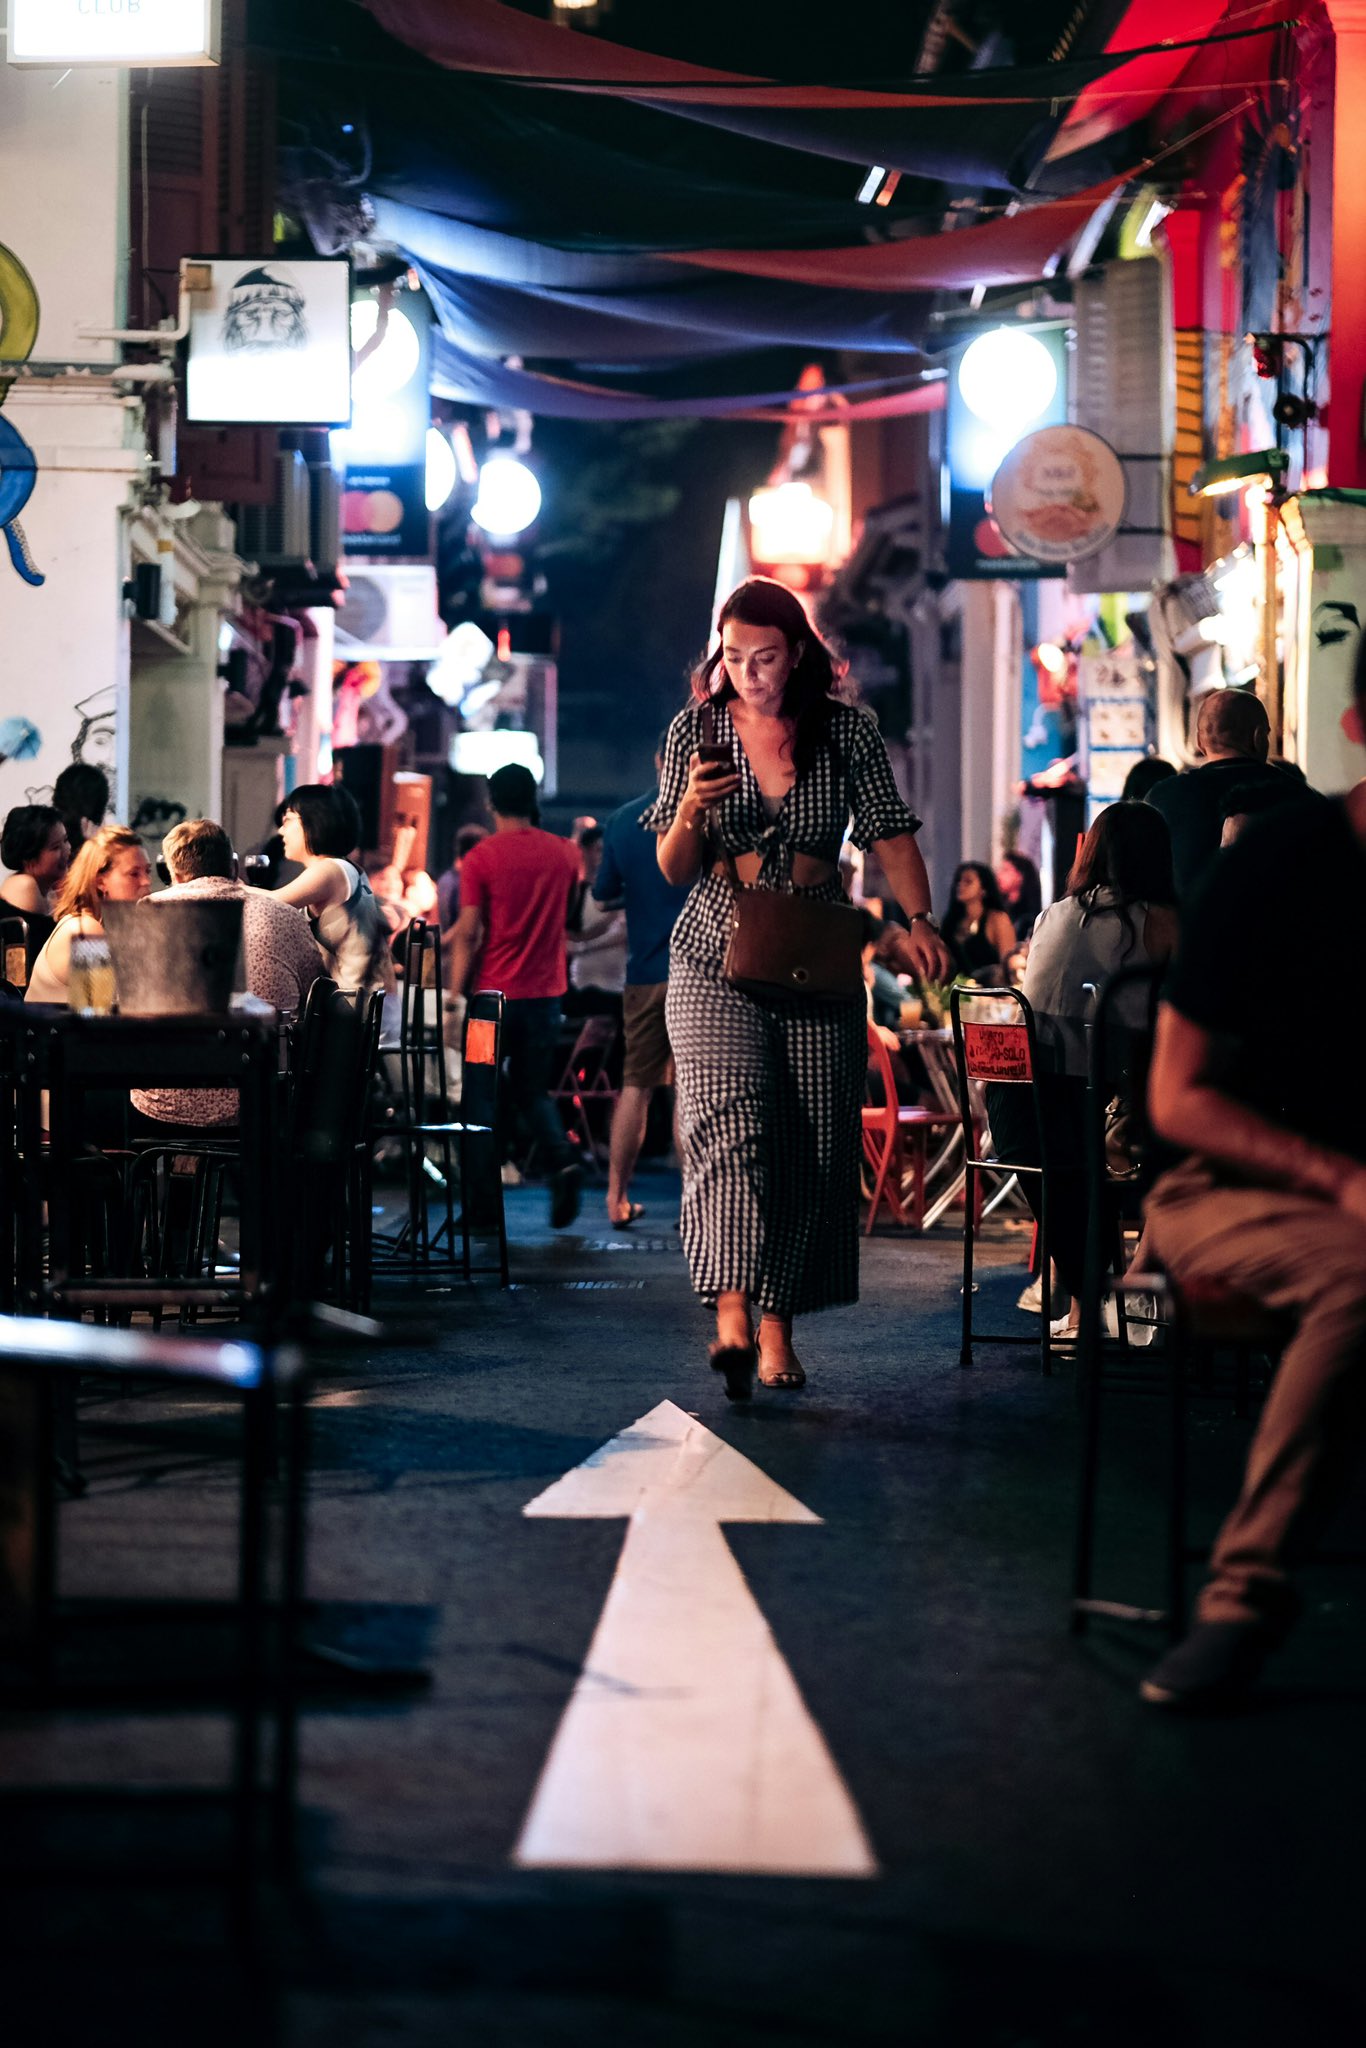 Picture of a laneway temporarily converted to night-market dining